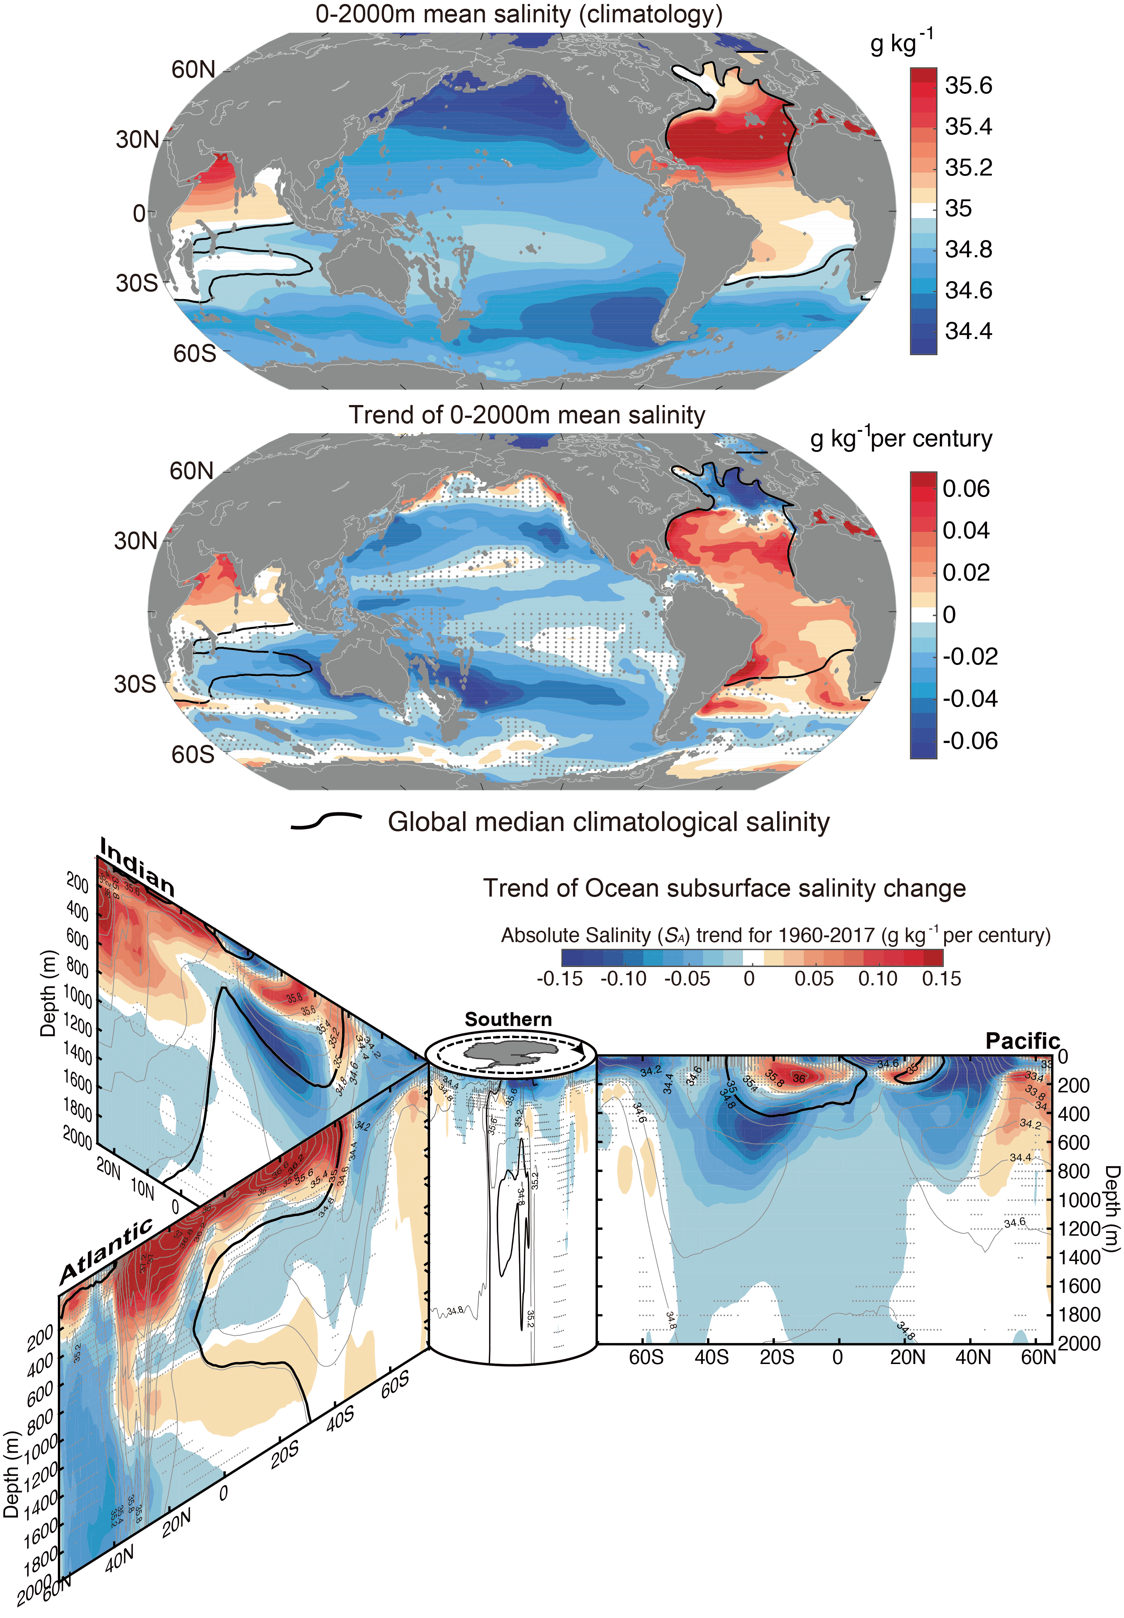 Figure 2. 0-2000 mean salinity climatology (top) shows the relatively fresh Pacific versus the salty Atlantic northern Indian Ocean. Its long-term trend (middle) has a remarkably similar pattern. The zonal mean ocean salinity trends (bottom) since 1960 in each ocean basin, organized around the Southern Ocean in the center, depict the penetration of surface anomalies into the ocean subsurface.